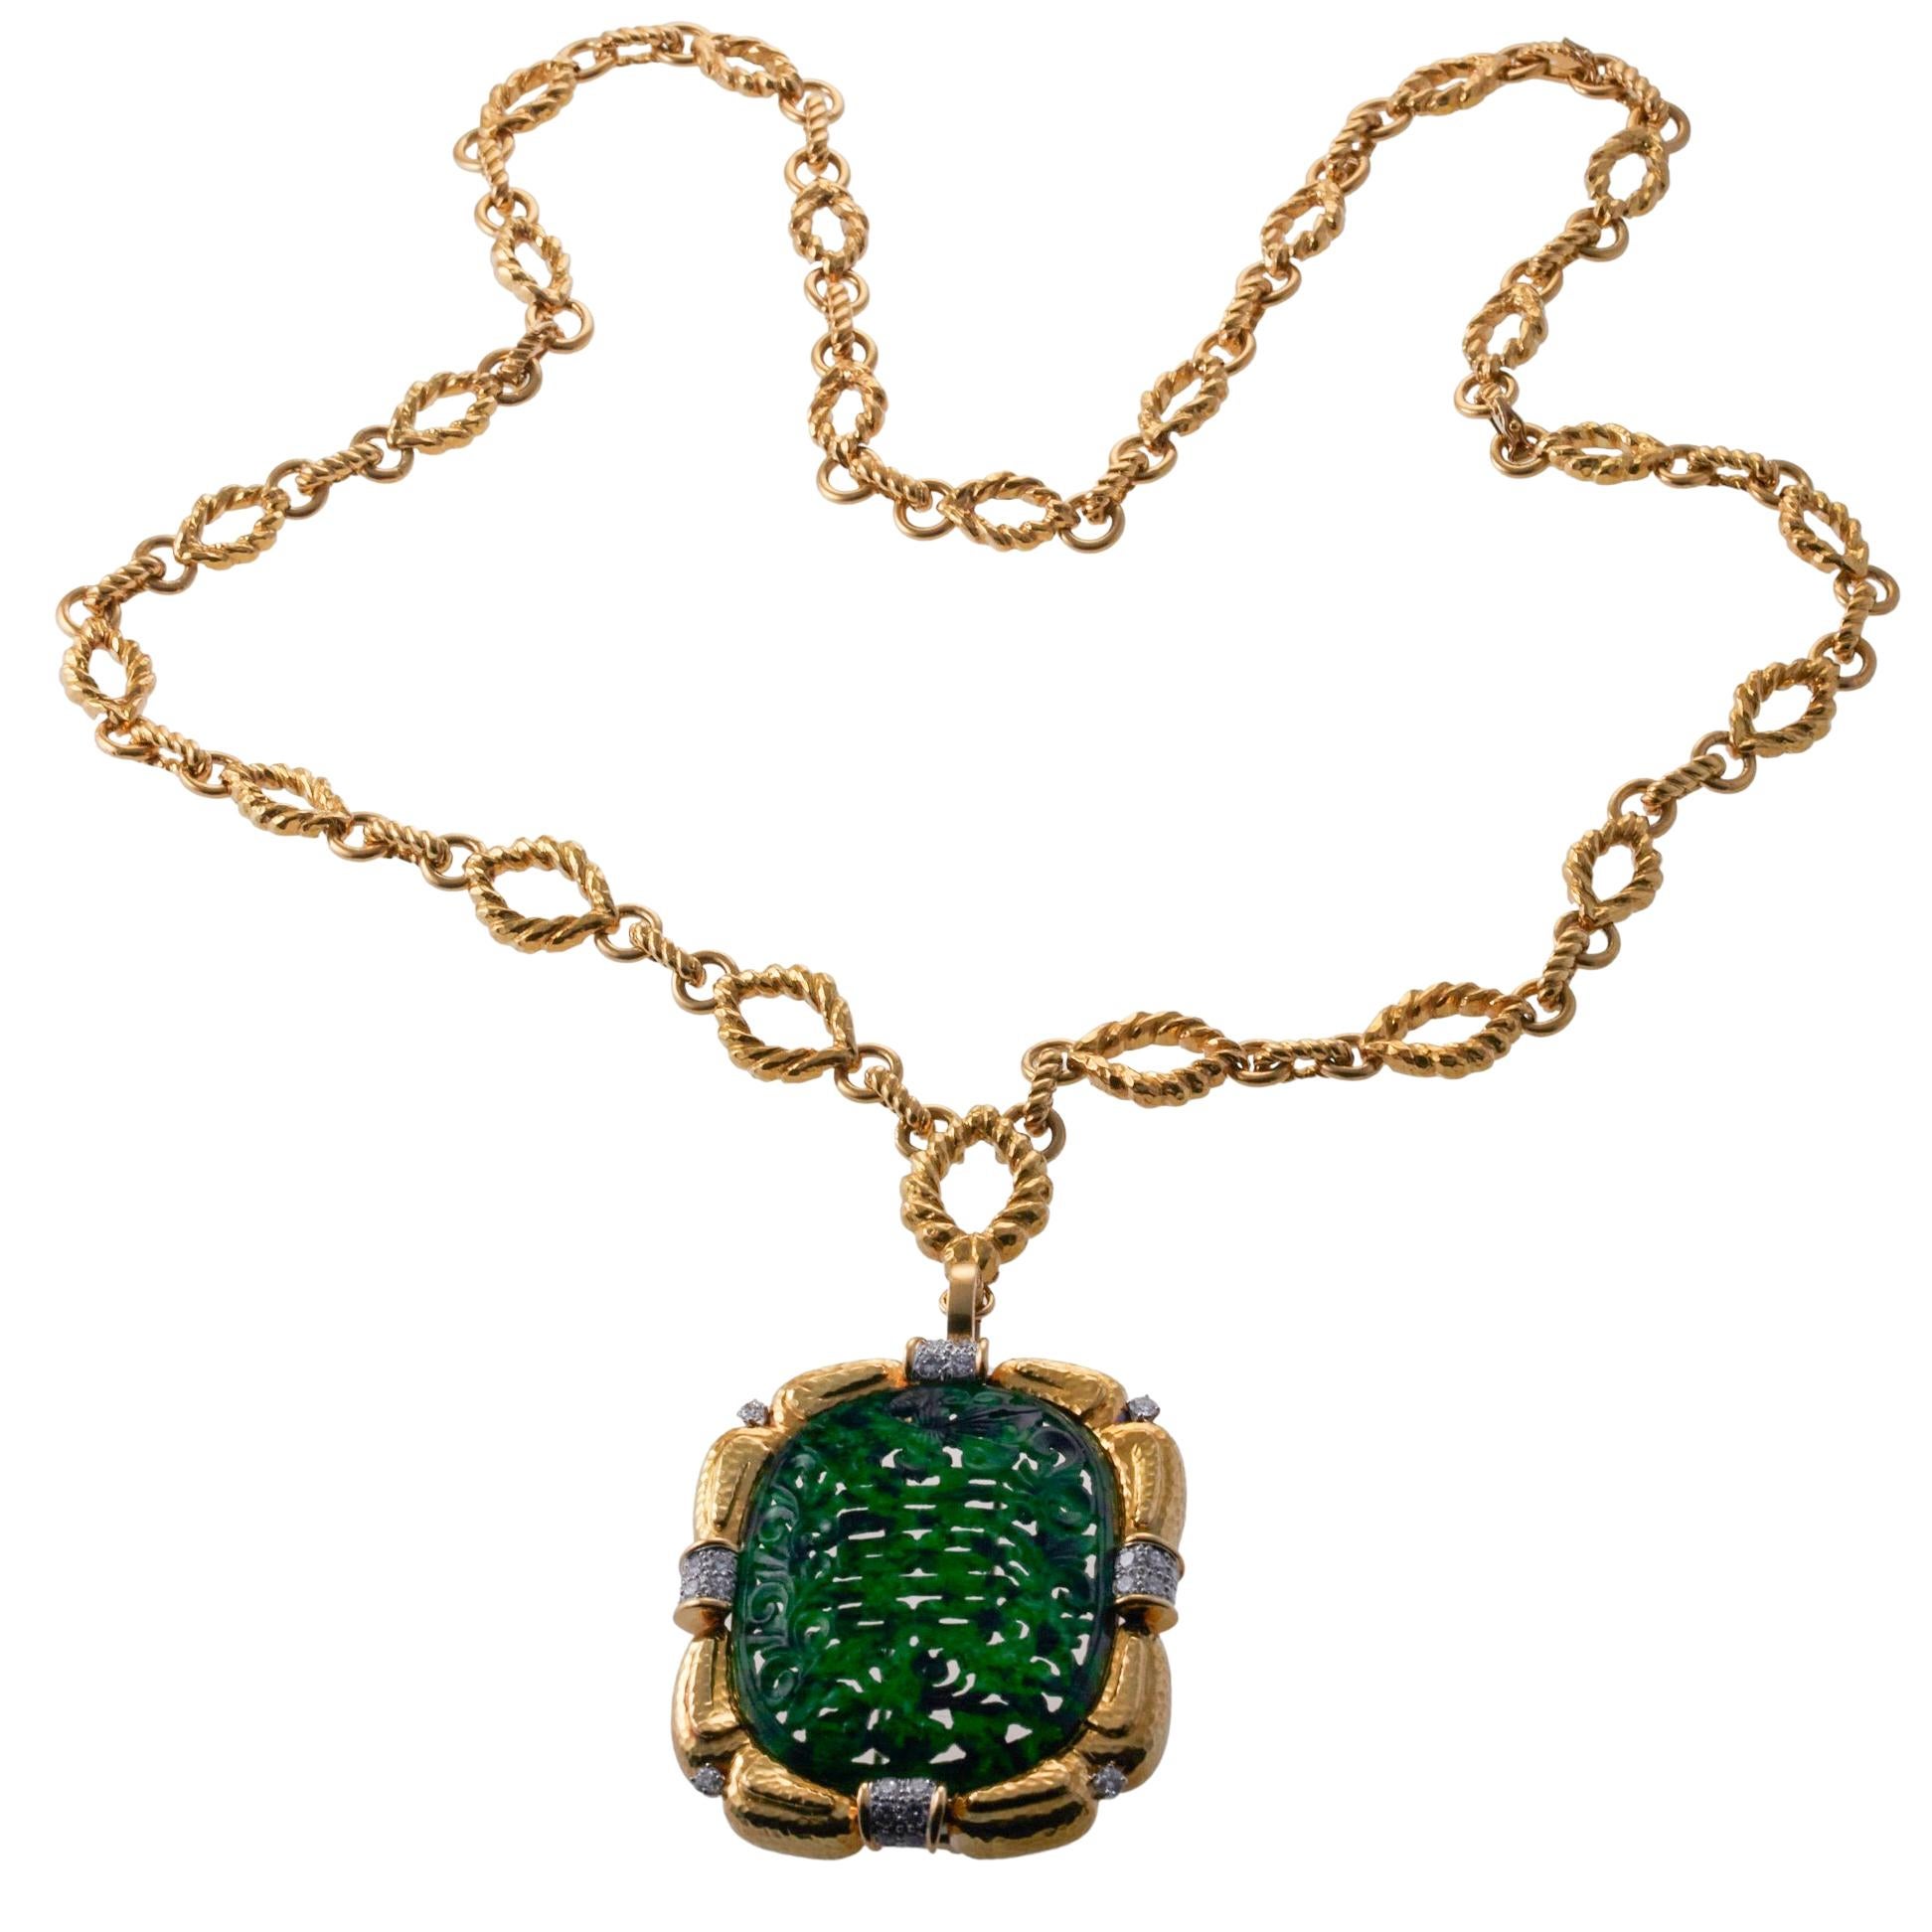 18k gold link necklace with detachable brooch/pendant, crafted by David Webb, the pendant isfeaturing carved jade and approx. 2.60ctw in VS-SI/H diamonds. Brooch measures 2 5/8